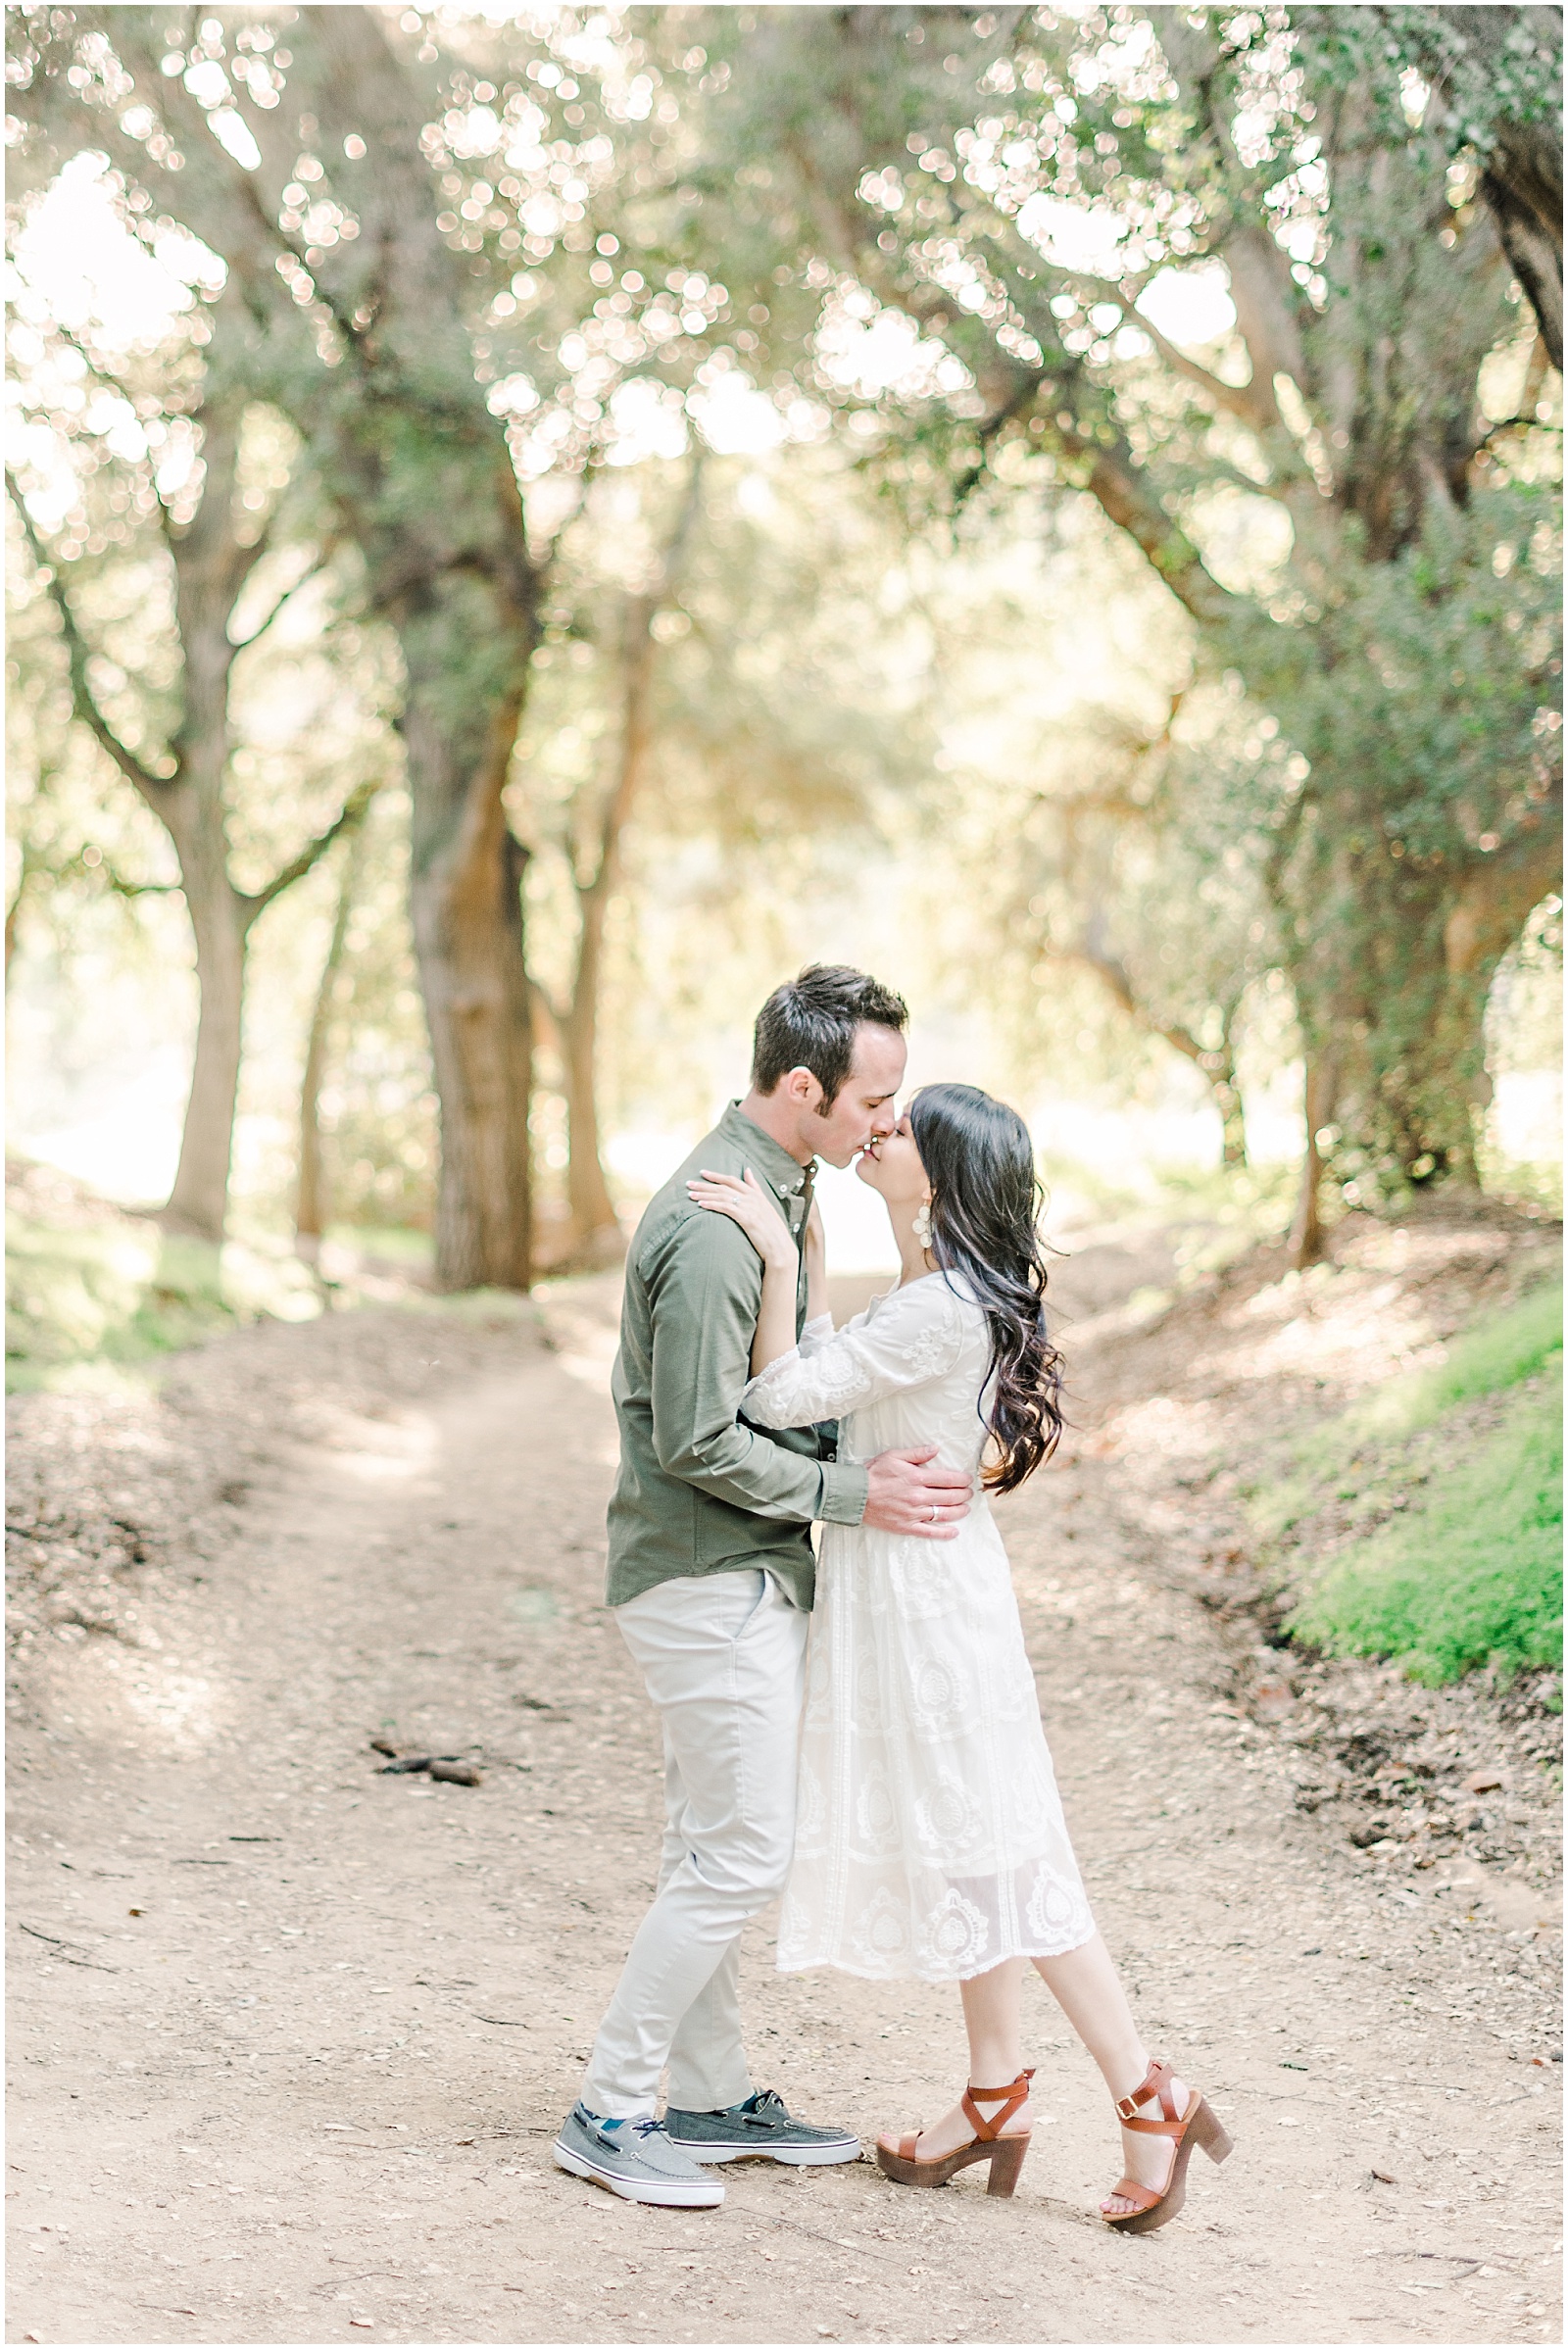 Wildwood Canyon Regional Park Engagement Session in Yucaipa by Mollie Jane Photography. To see more go to www.molliejanephotography.com